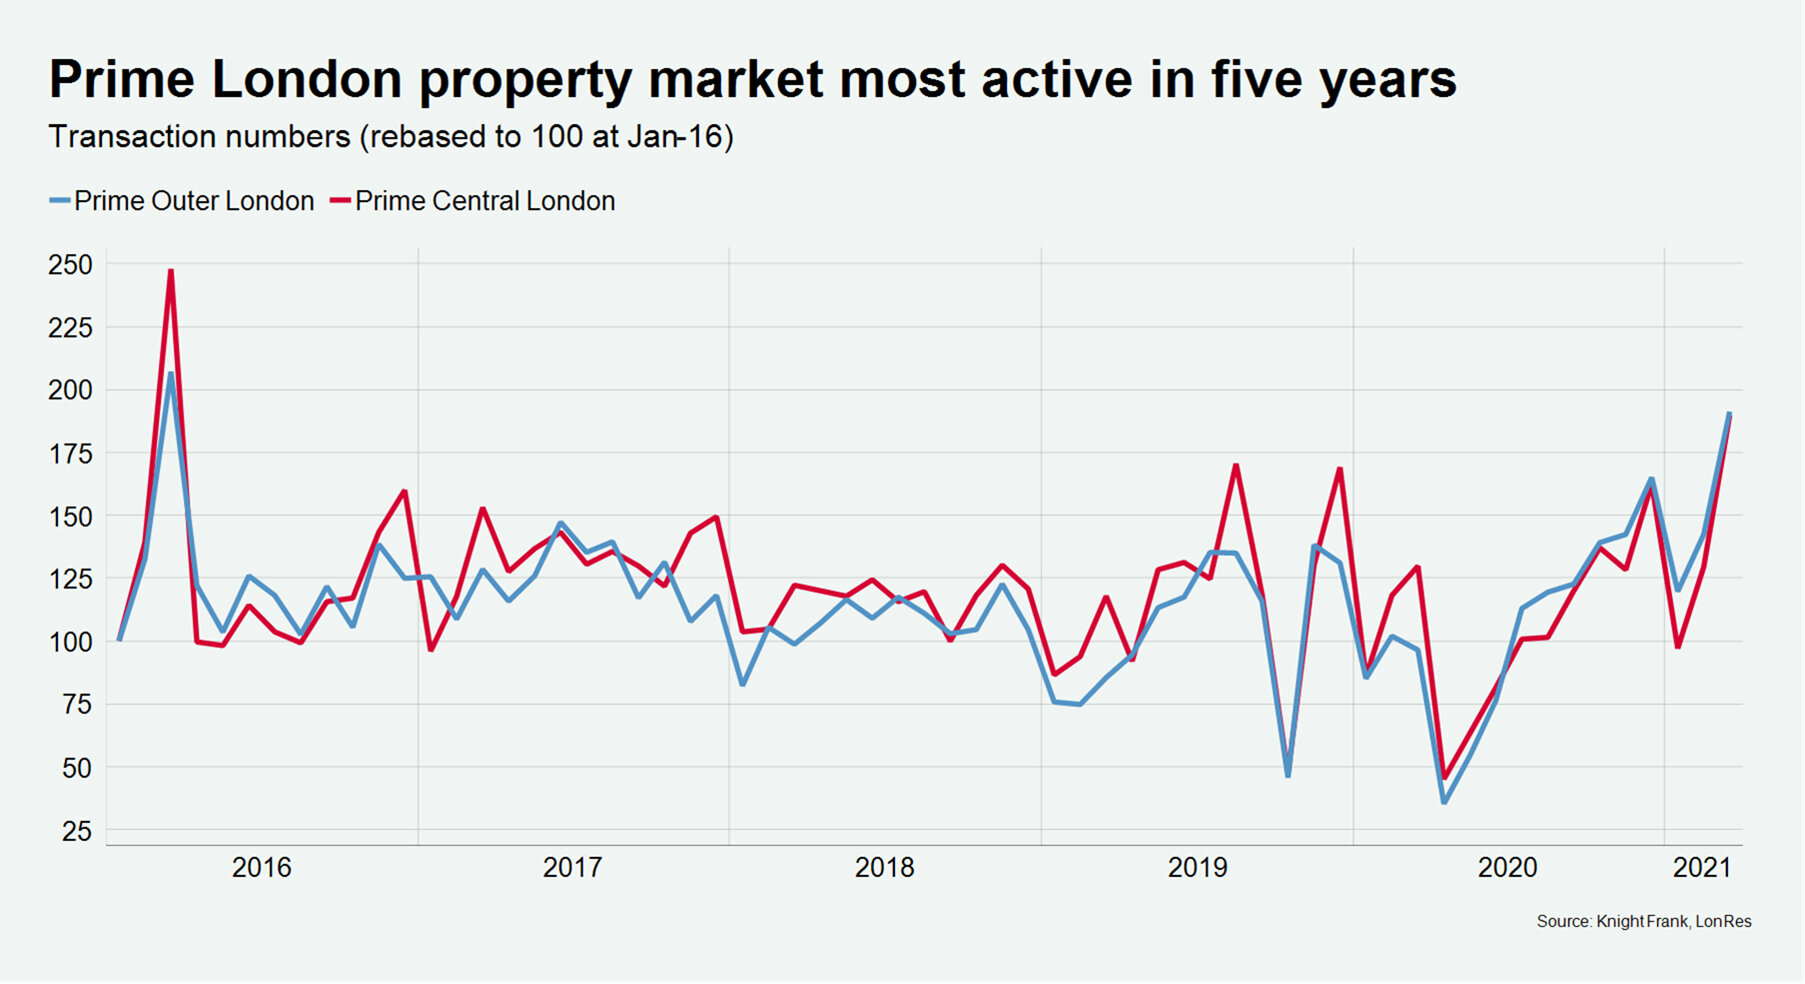 https://www.worldpropertyjournal.com/news-assets/Prime-London-property-market-most-active-in-five-years.jpg